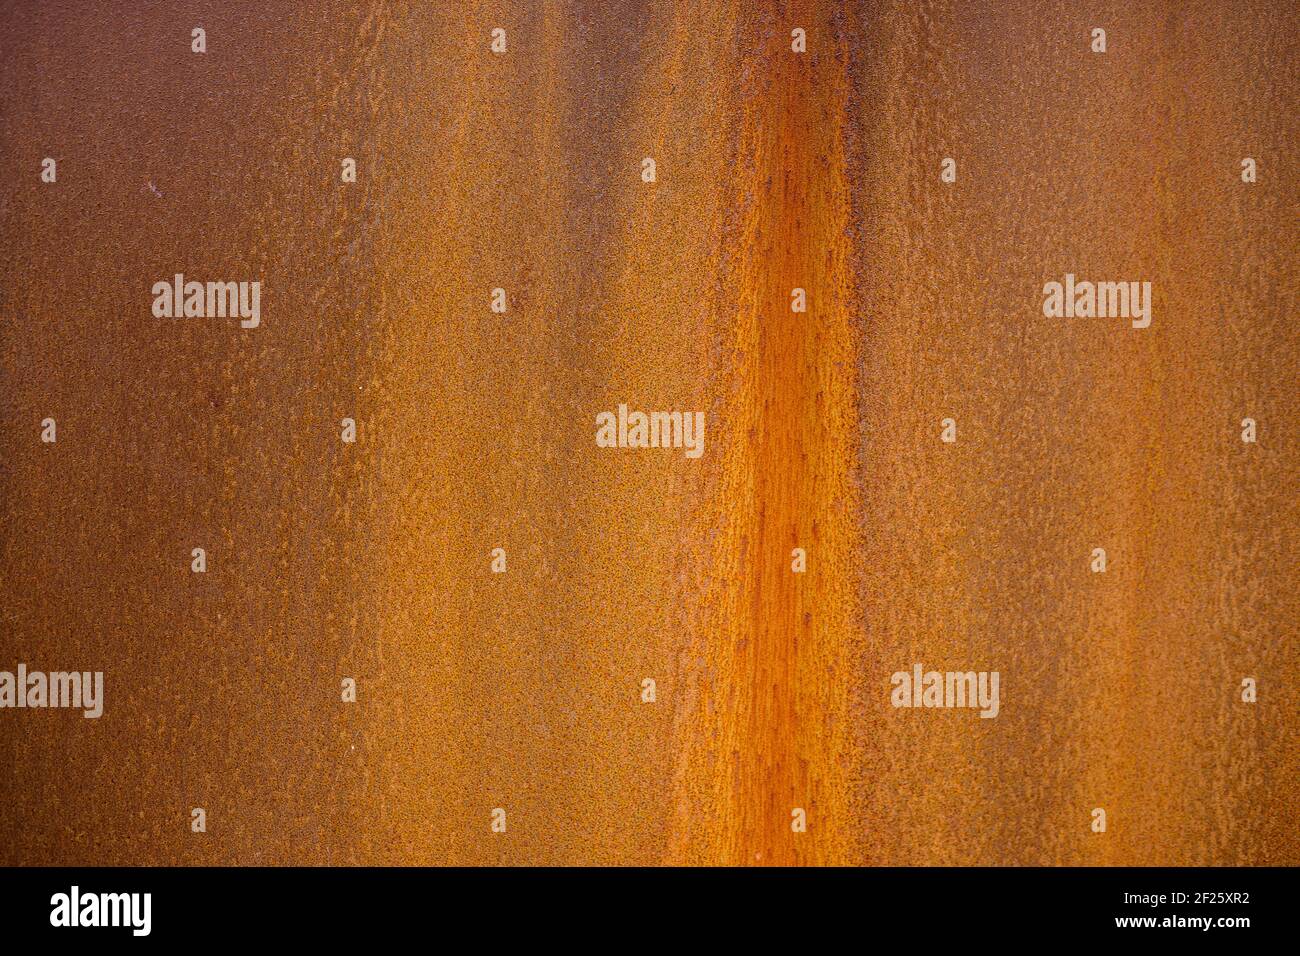 Grounge abstract texture or background. Perfect pattern with space Stock Photo